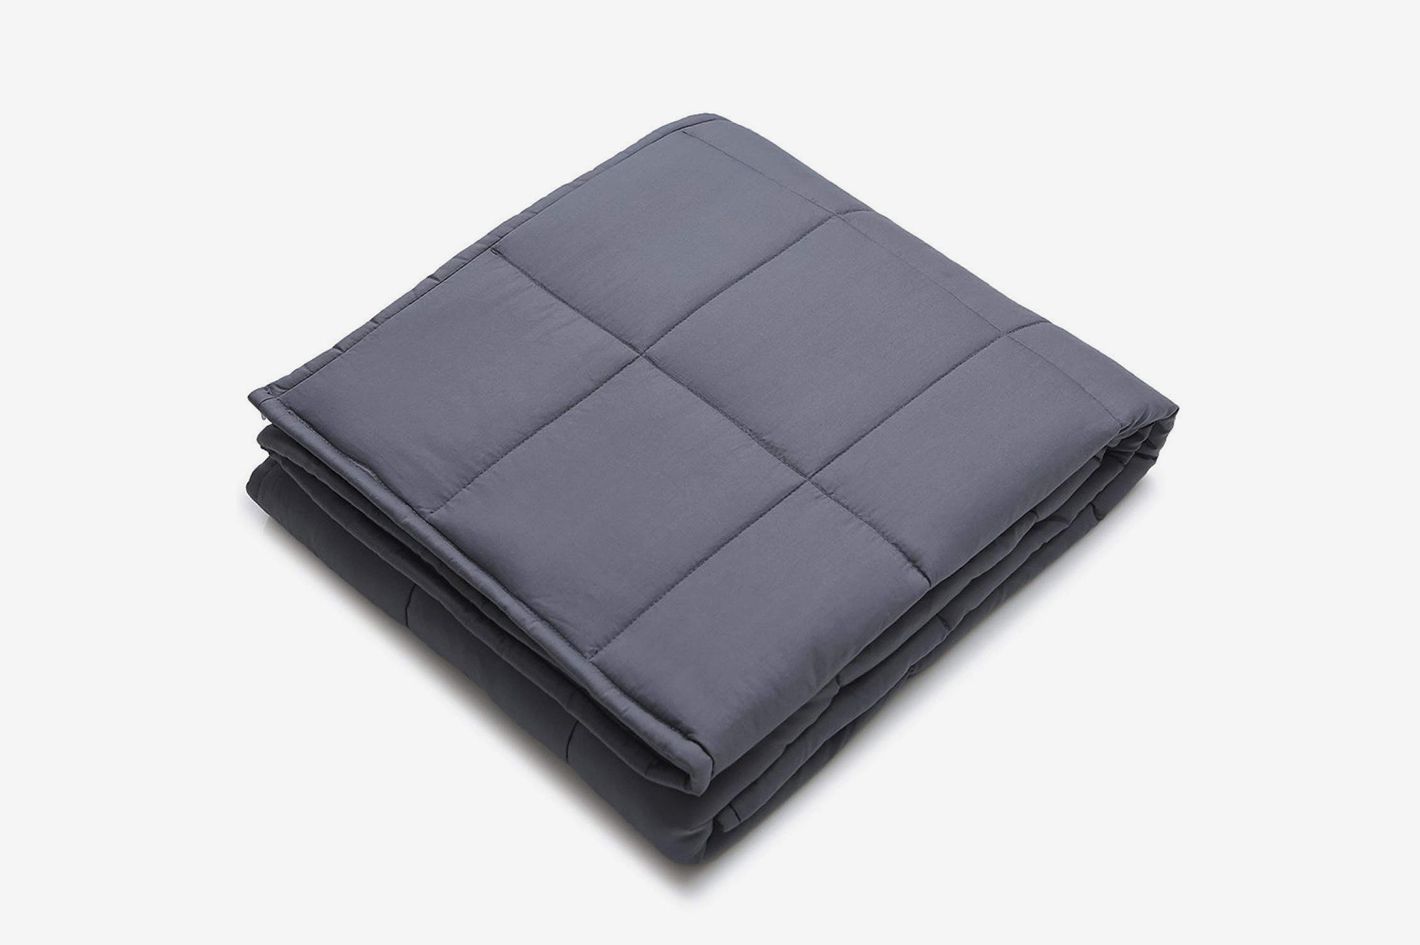 YnM Weighted Blanket for Prime Day 2019